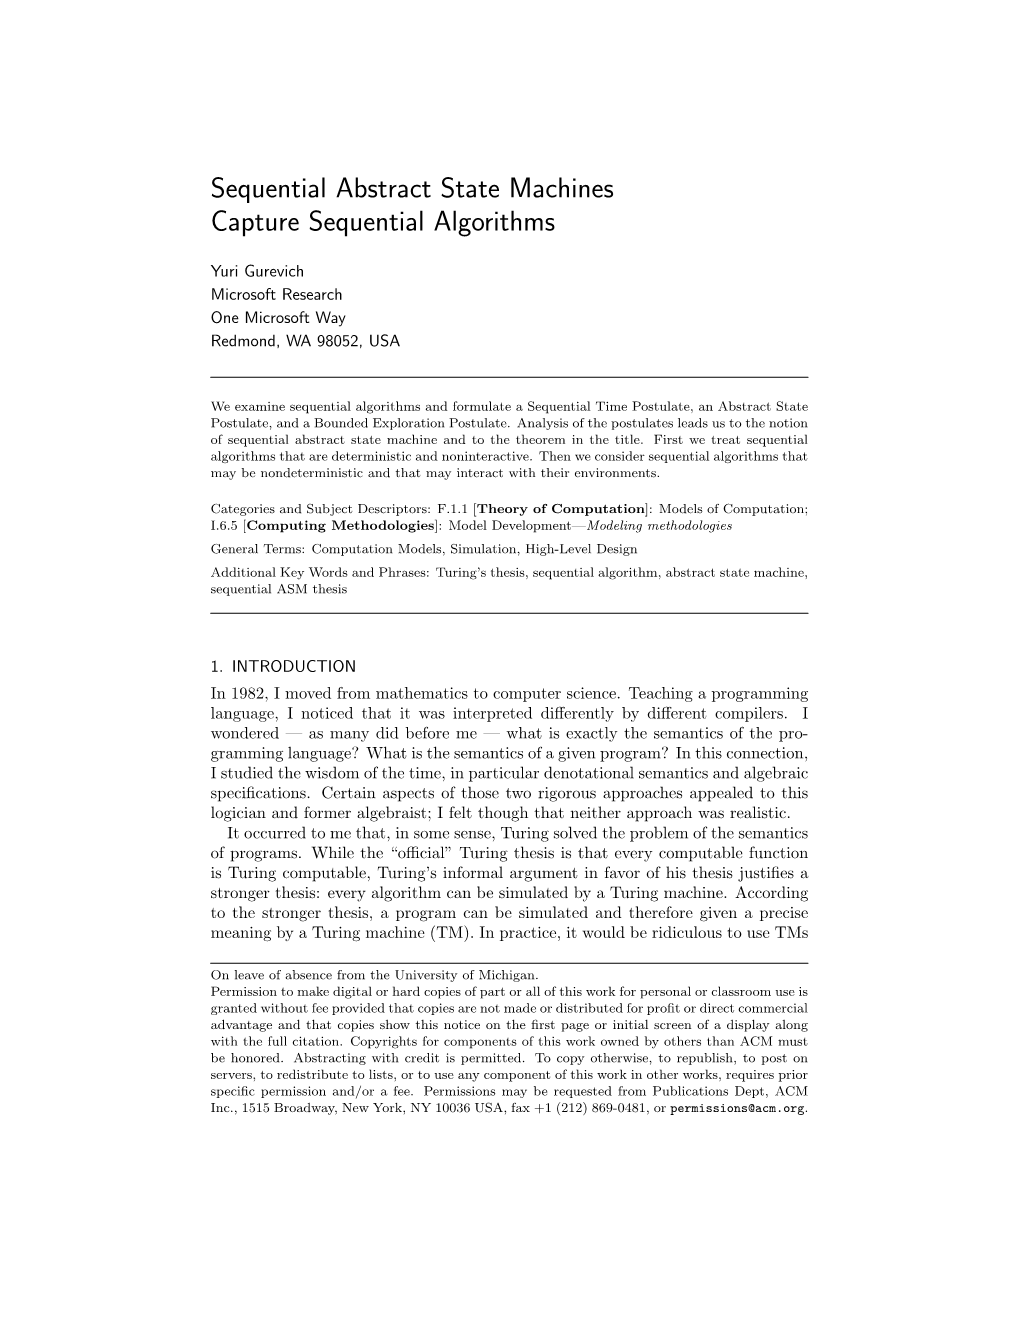 Sequential Abstract State Machines Capture Sequential Algorithms